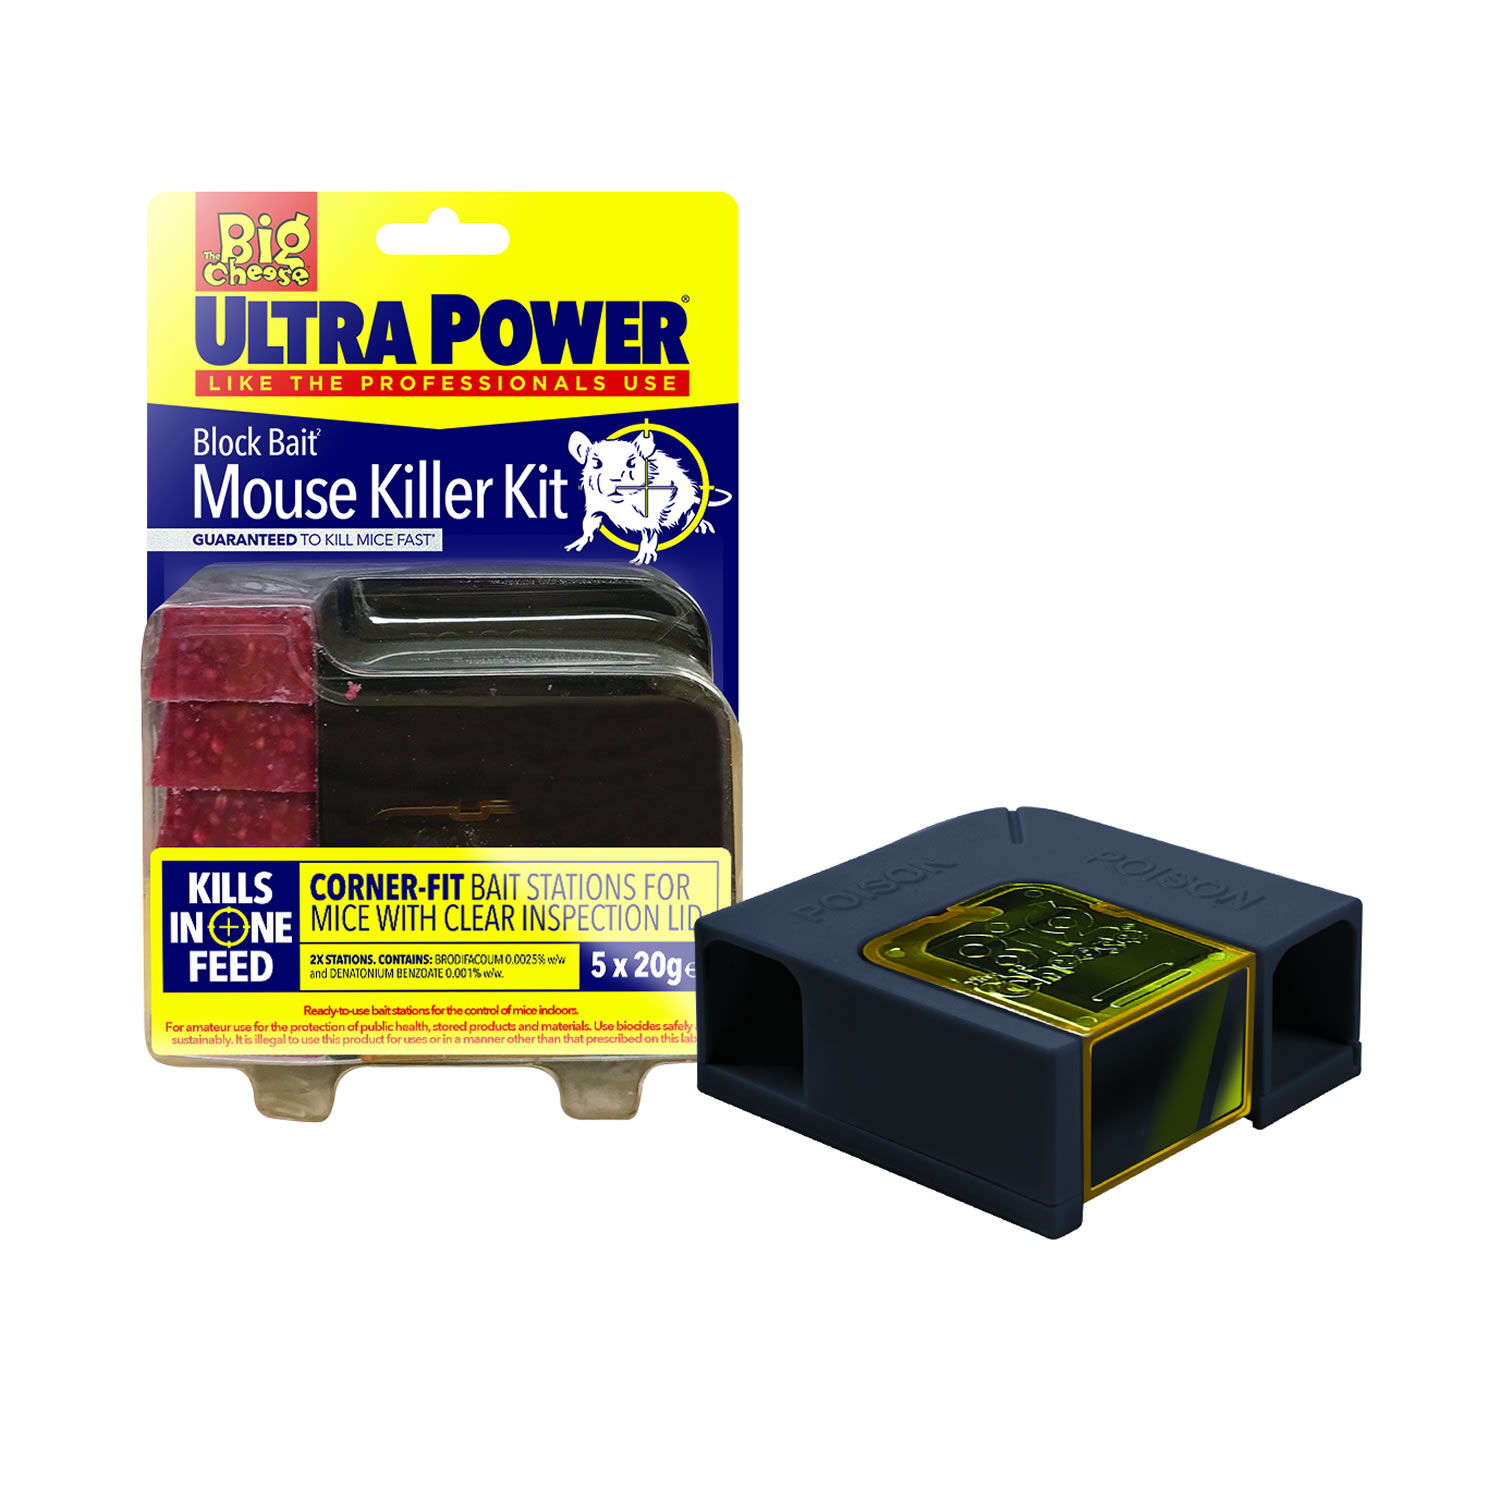 THE BIG CHEESE ULTRA POWER BLOCK BAIT MOUSE KILLER KIT STATION & REFILLS WITH REFILLS